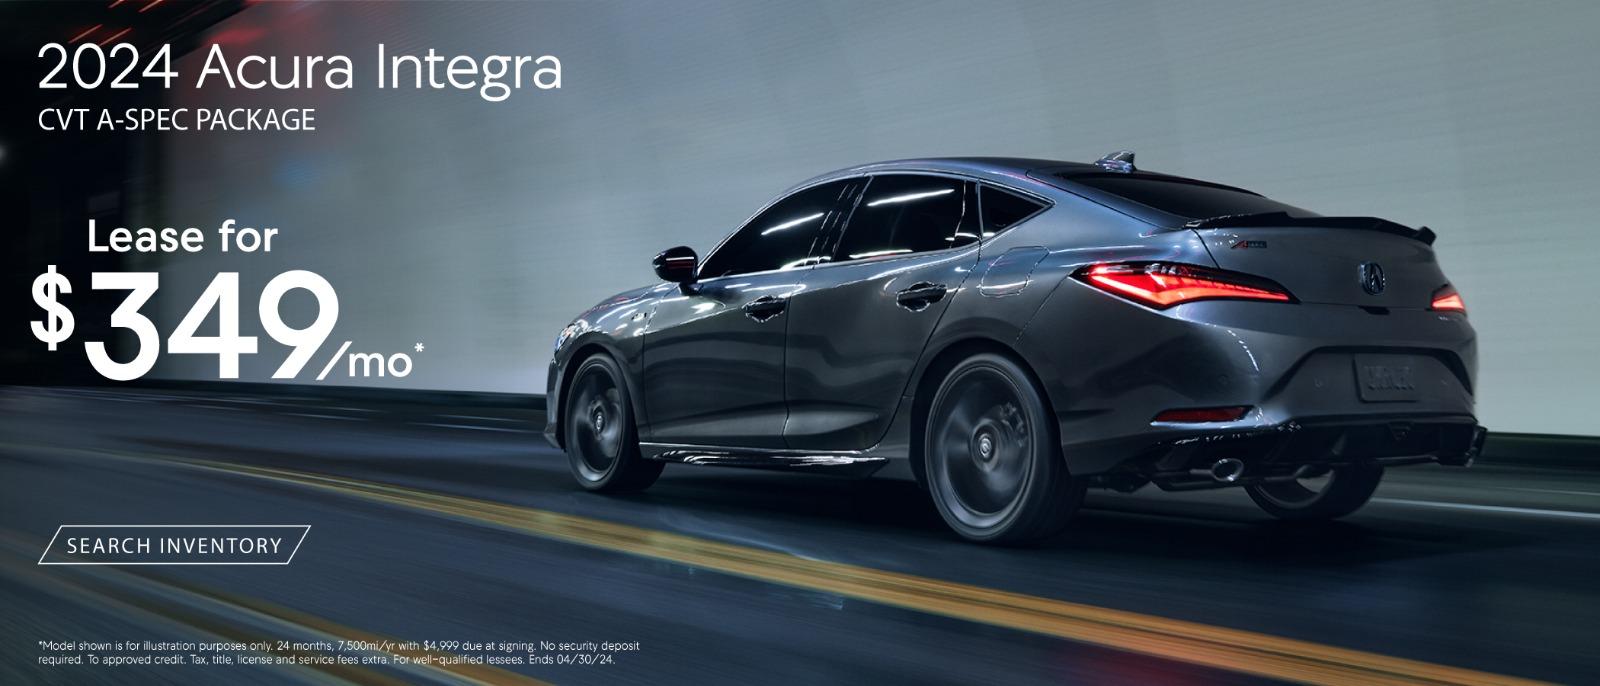 2024 Acura Integra Lease for $349per month